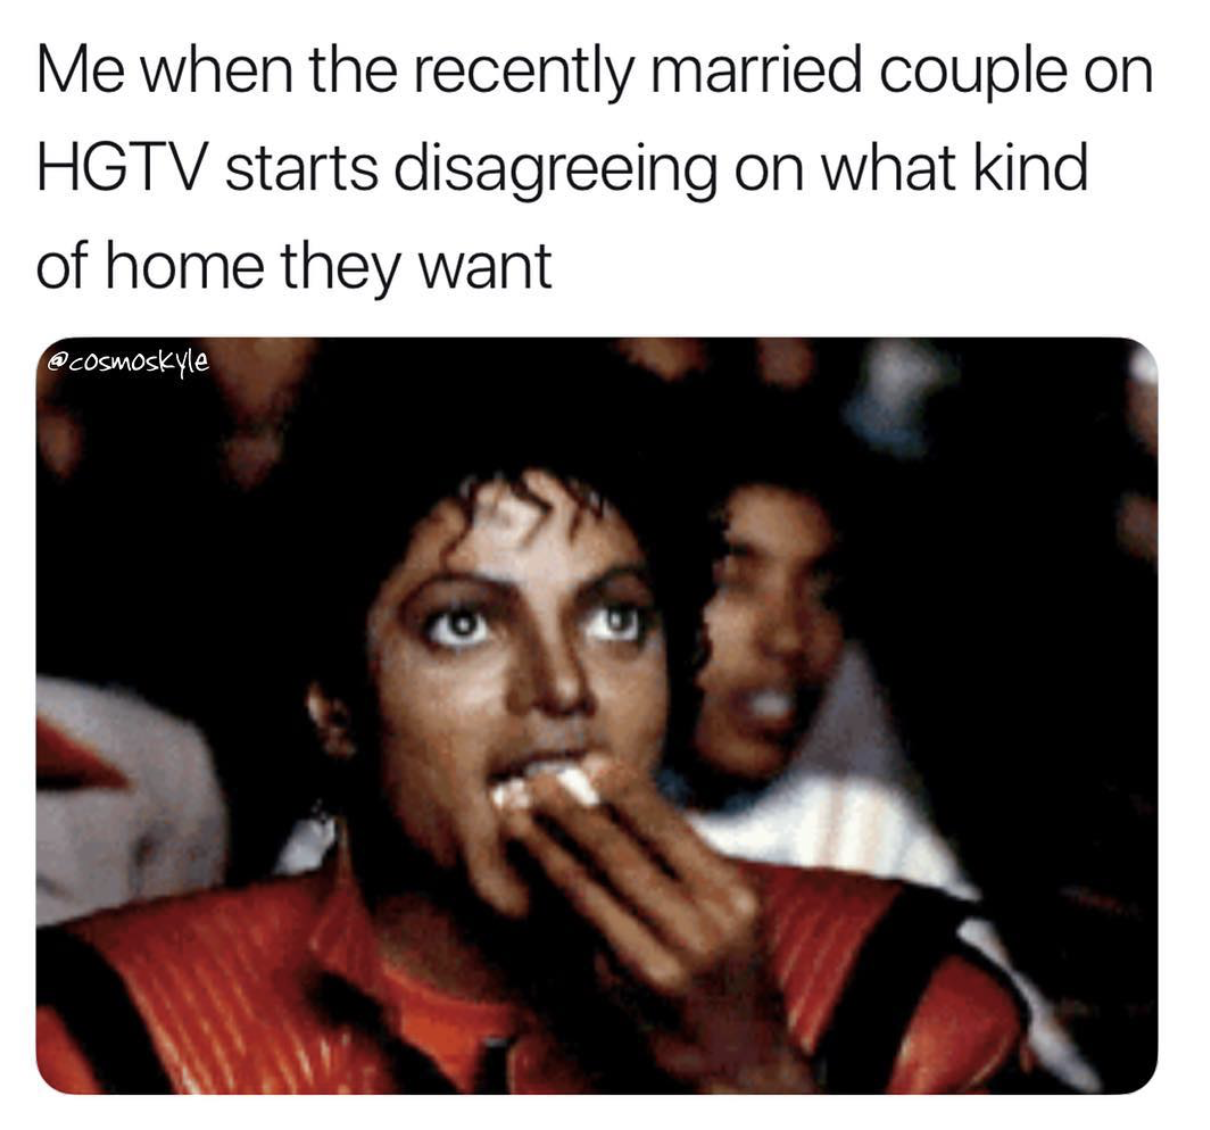 michael jackson popcorn meme - Me when the recently married couple on Hgtv starts disagreeing on what kind of home they want cosmoskyle